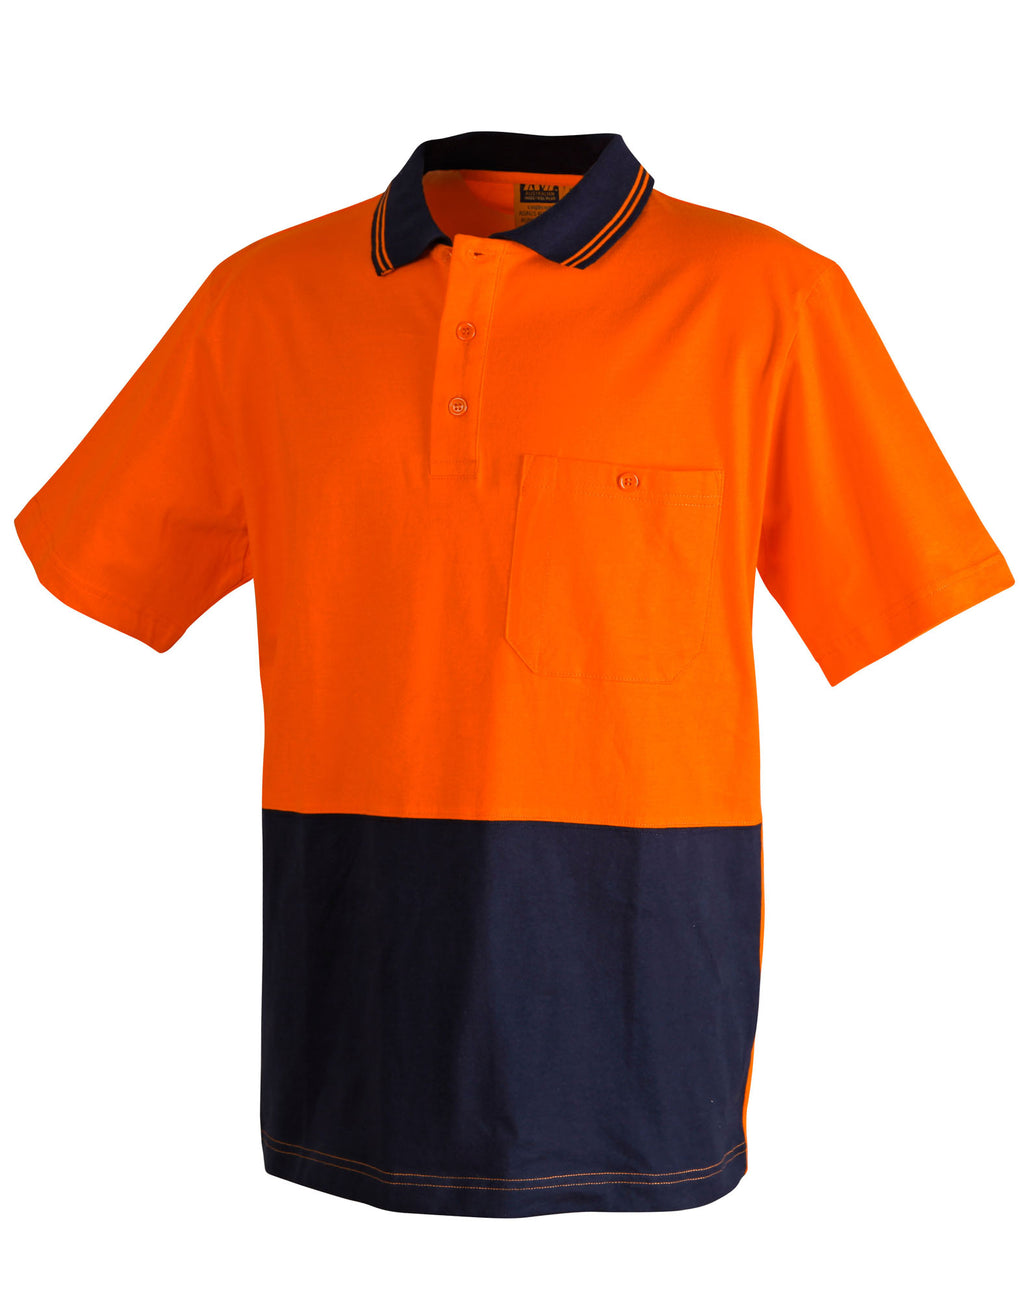 JCSW35 Cotton Jersey Two Tone Safety Polo